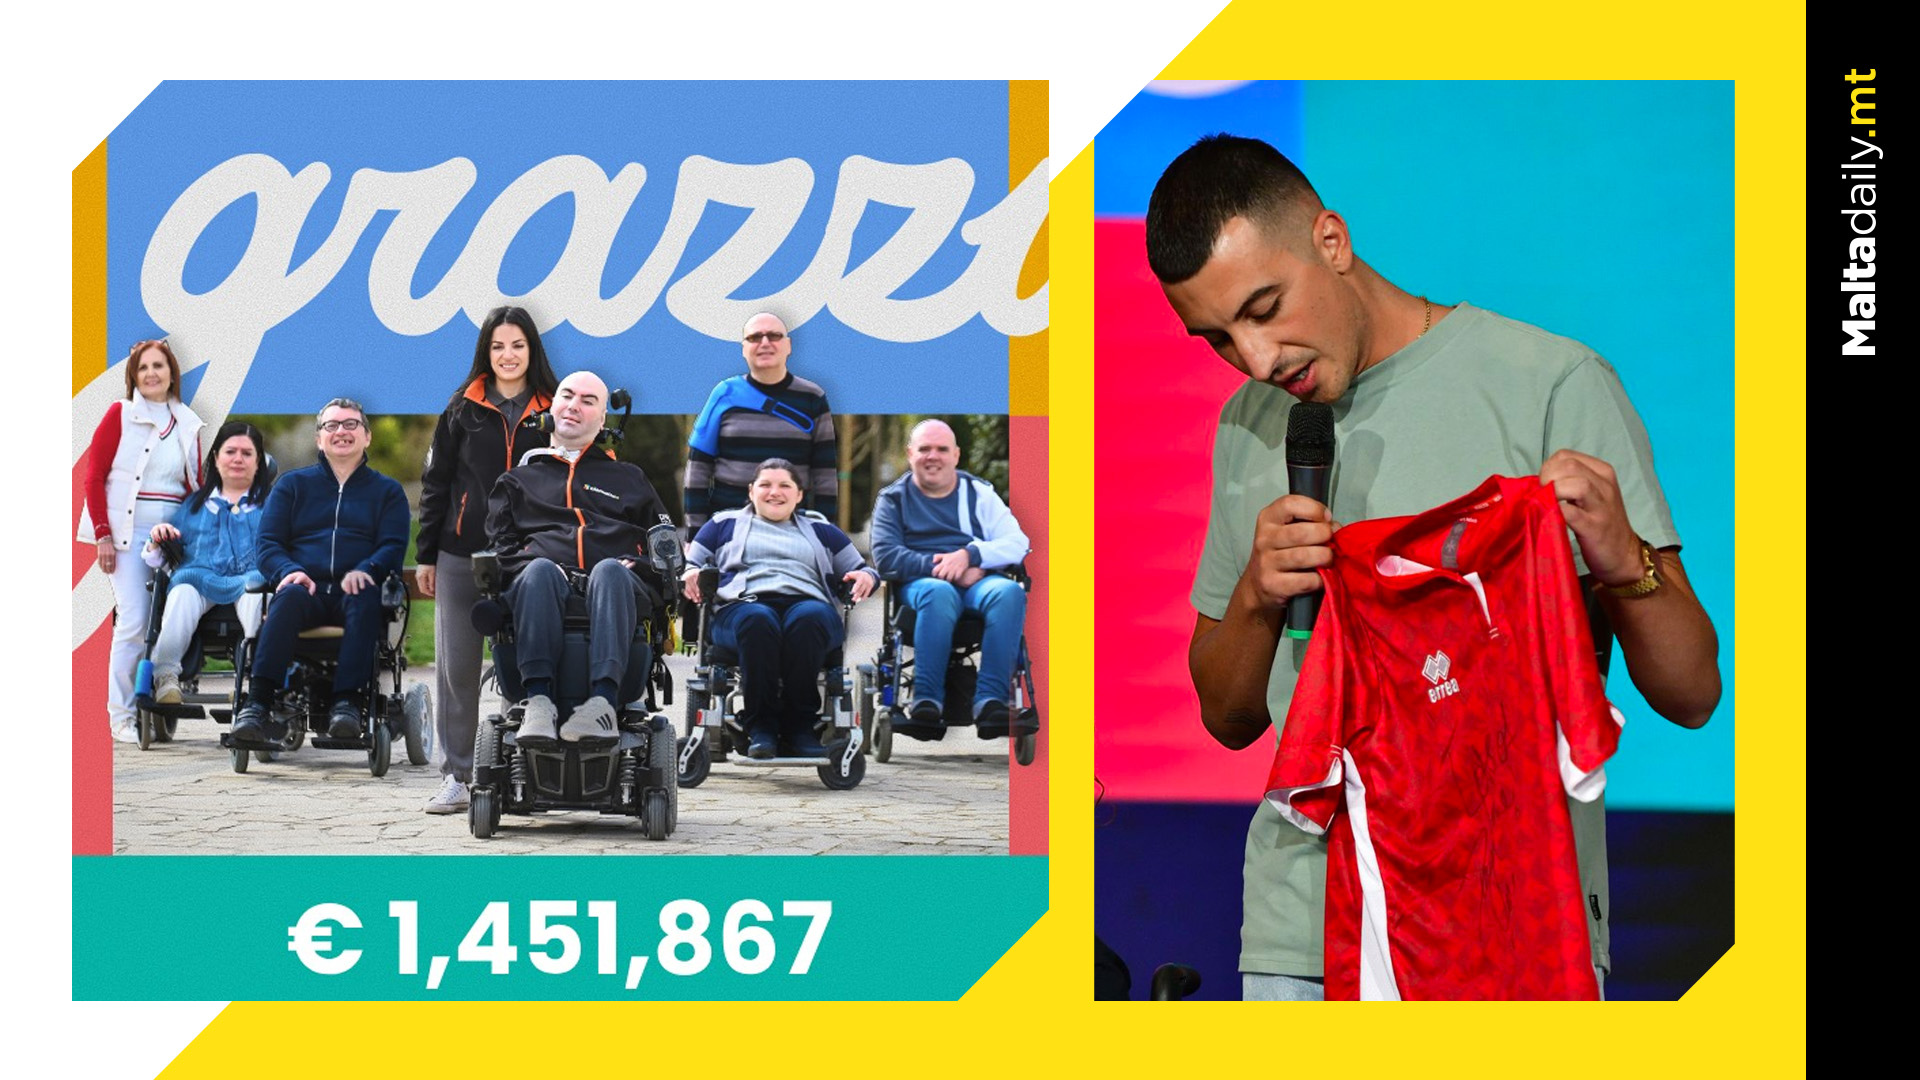 €1,451,867 Collected During ALS Malta Telethon